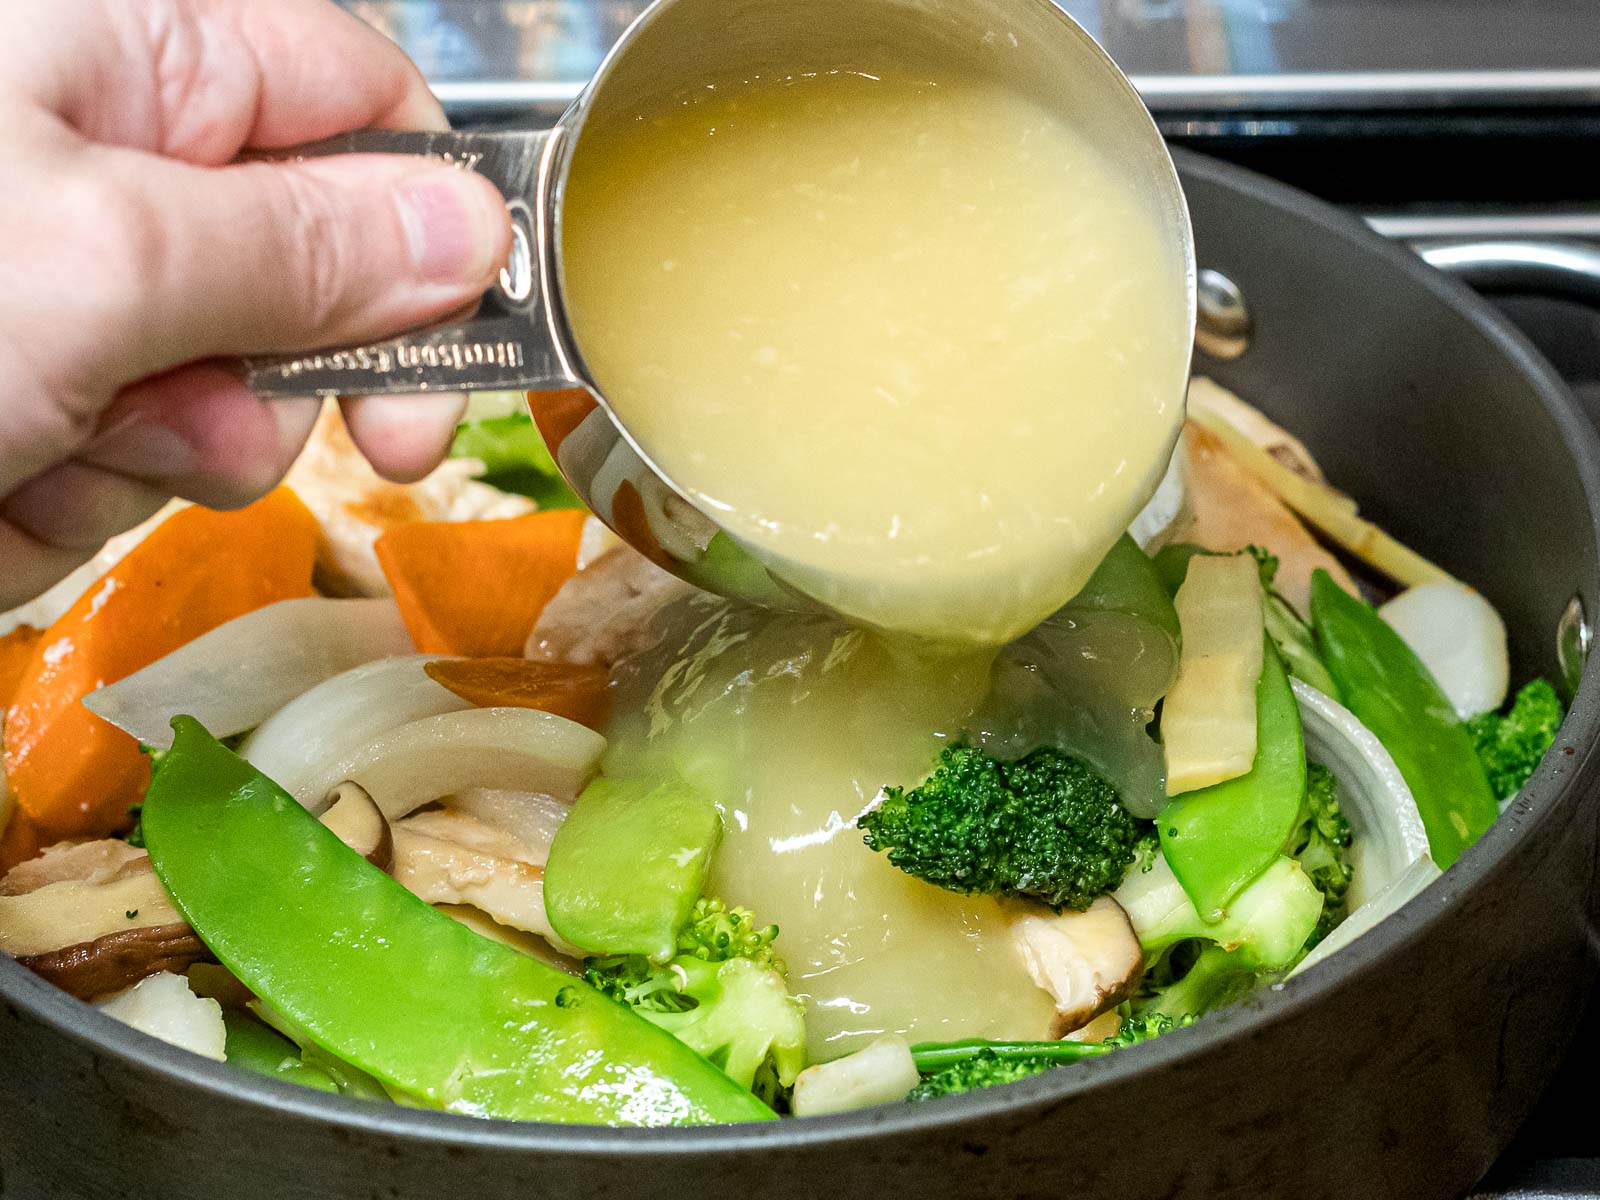 Moo goo gai pan sauce being added to chicken and vegetables stir fry